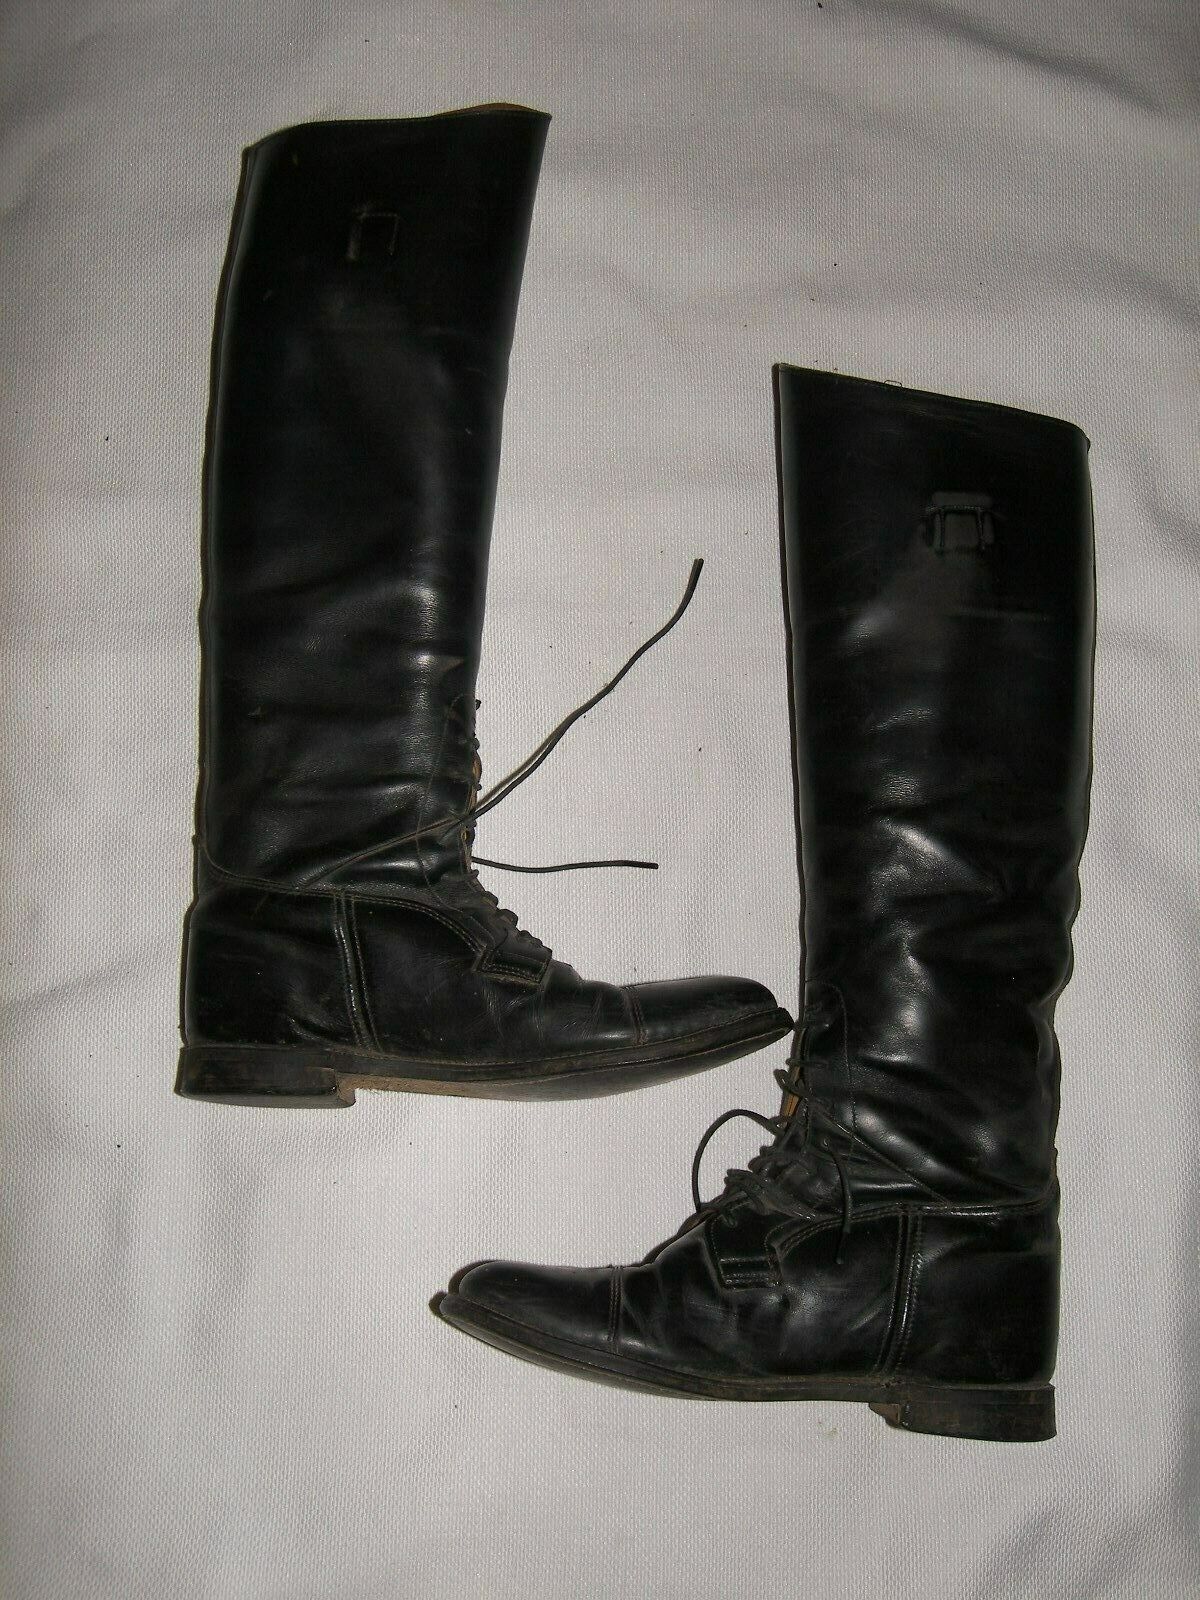 THE EMERSON BOOT TALL LEATHER RIDING BOOT LACE UP SIZE 7 1/2